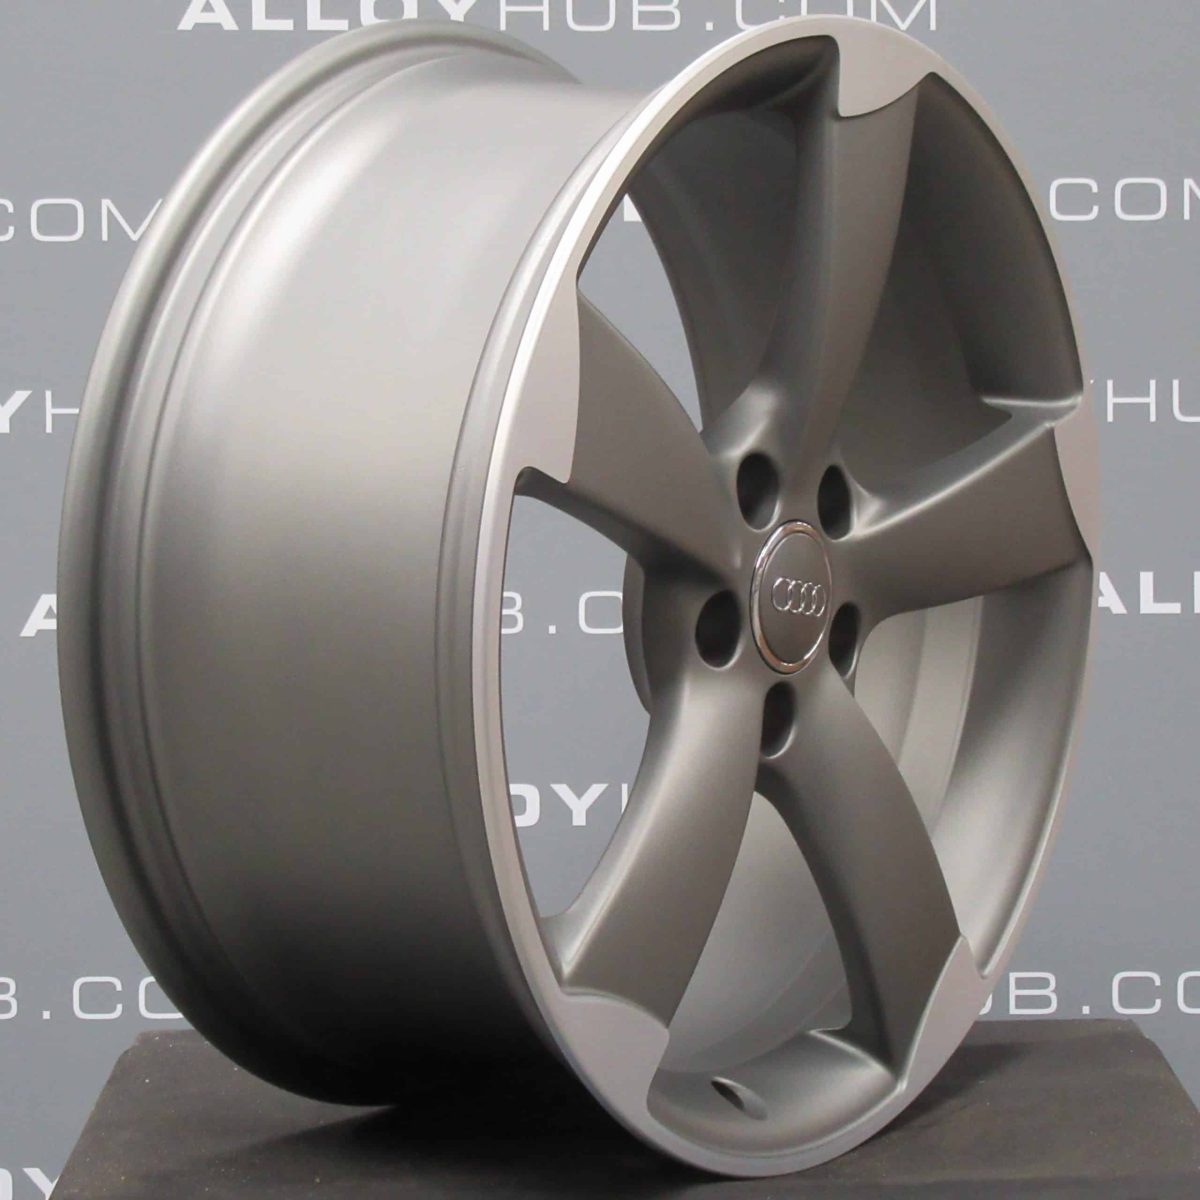 Genuine Audi A7 A8 S7 S8 RS7 4G 4H Rotor Arm 5 Spoke 21" Inch Alloy Wheels with Grey & Diamond Turned Finish 4H0 601 025 AT 4H0 601 025 BA